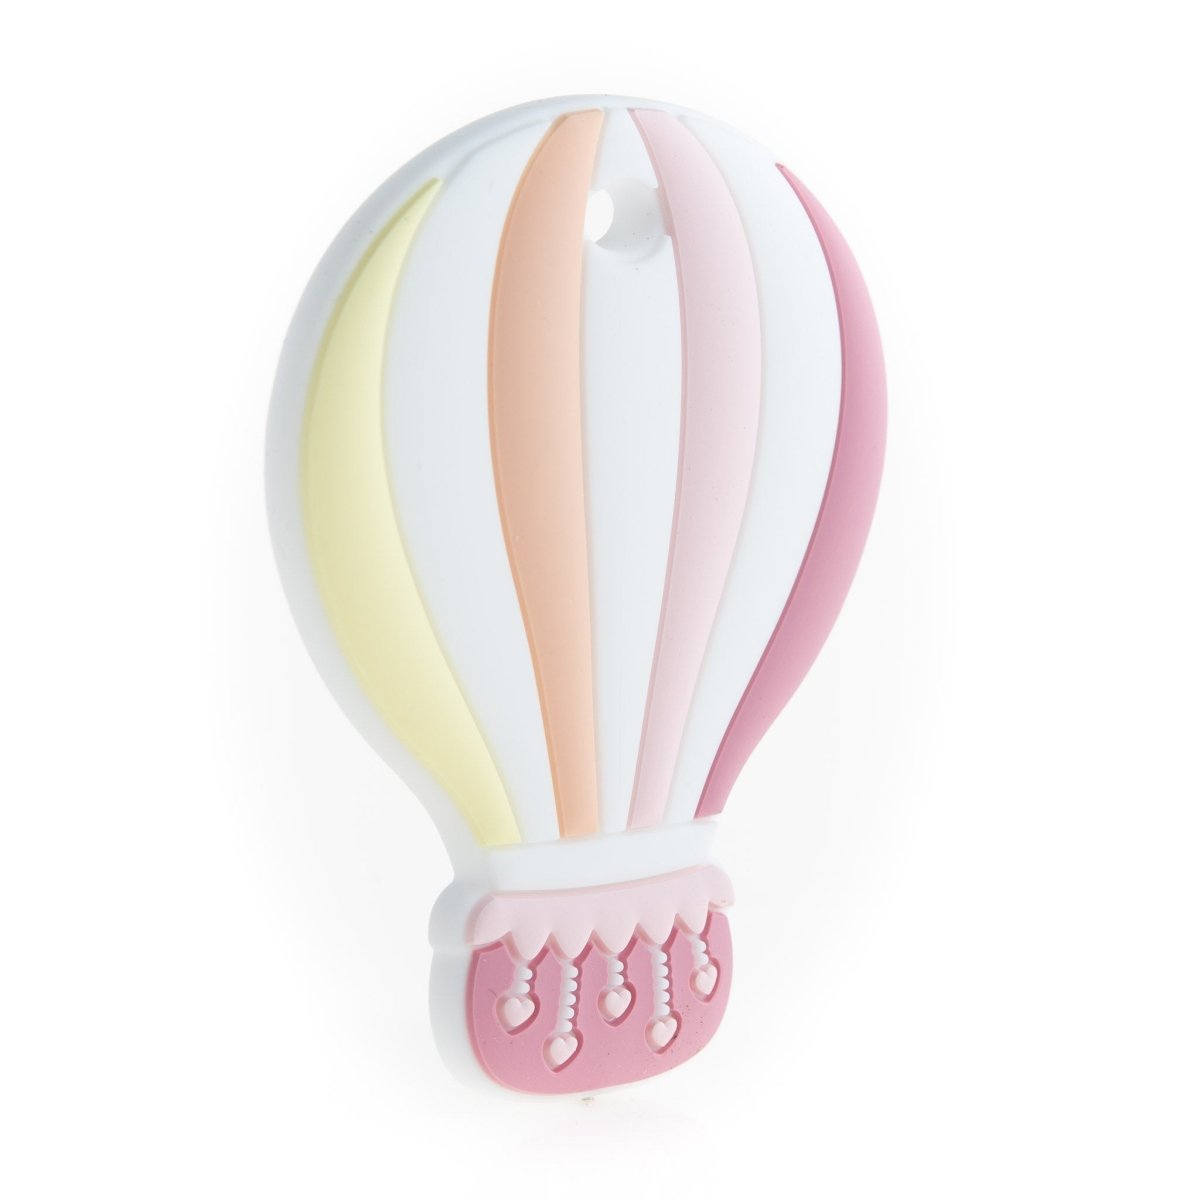 Silicone Teethers and Pendants Colorful Hot Air Balloons Dusk from Cara & Co Craft Supply